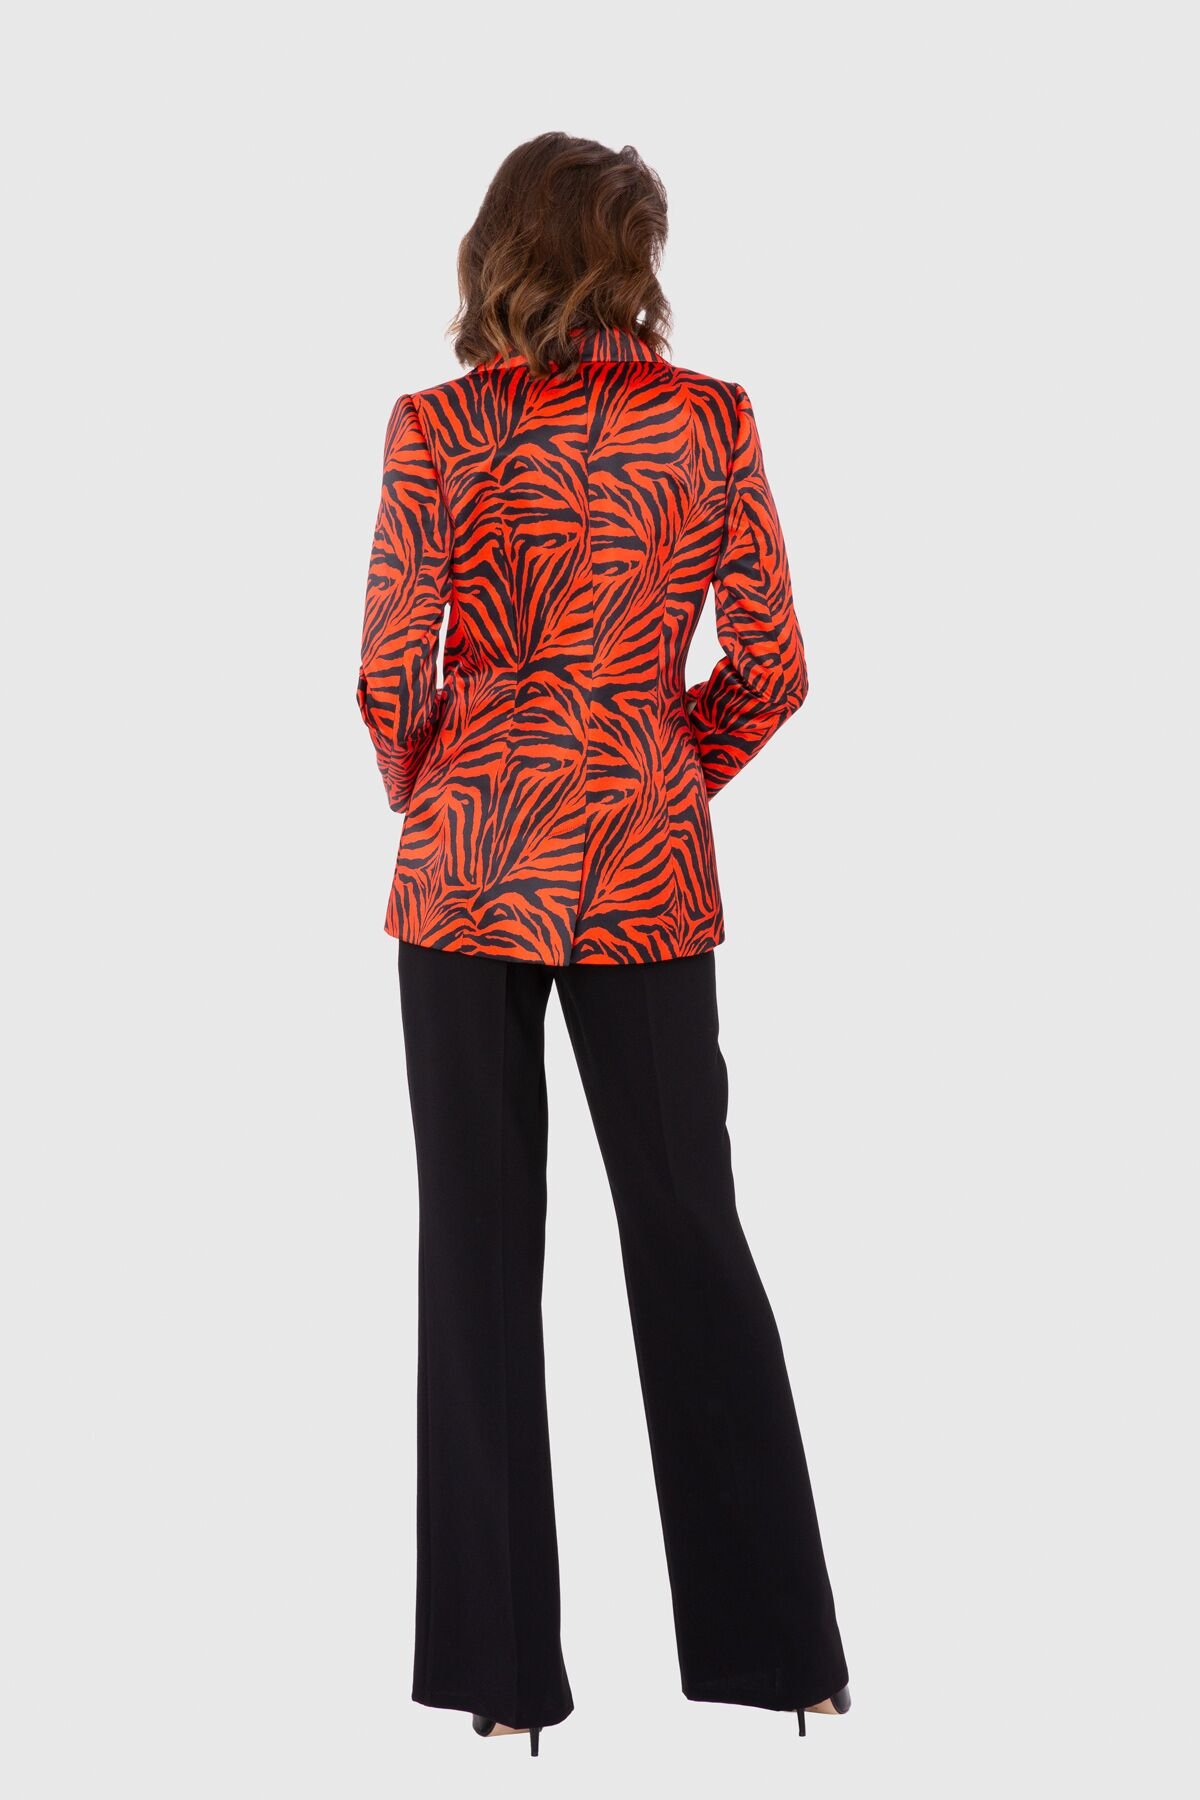 Zebra Patterned Contrast Flowy Crepe Trousers Red Suit